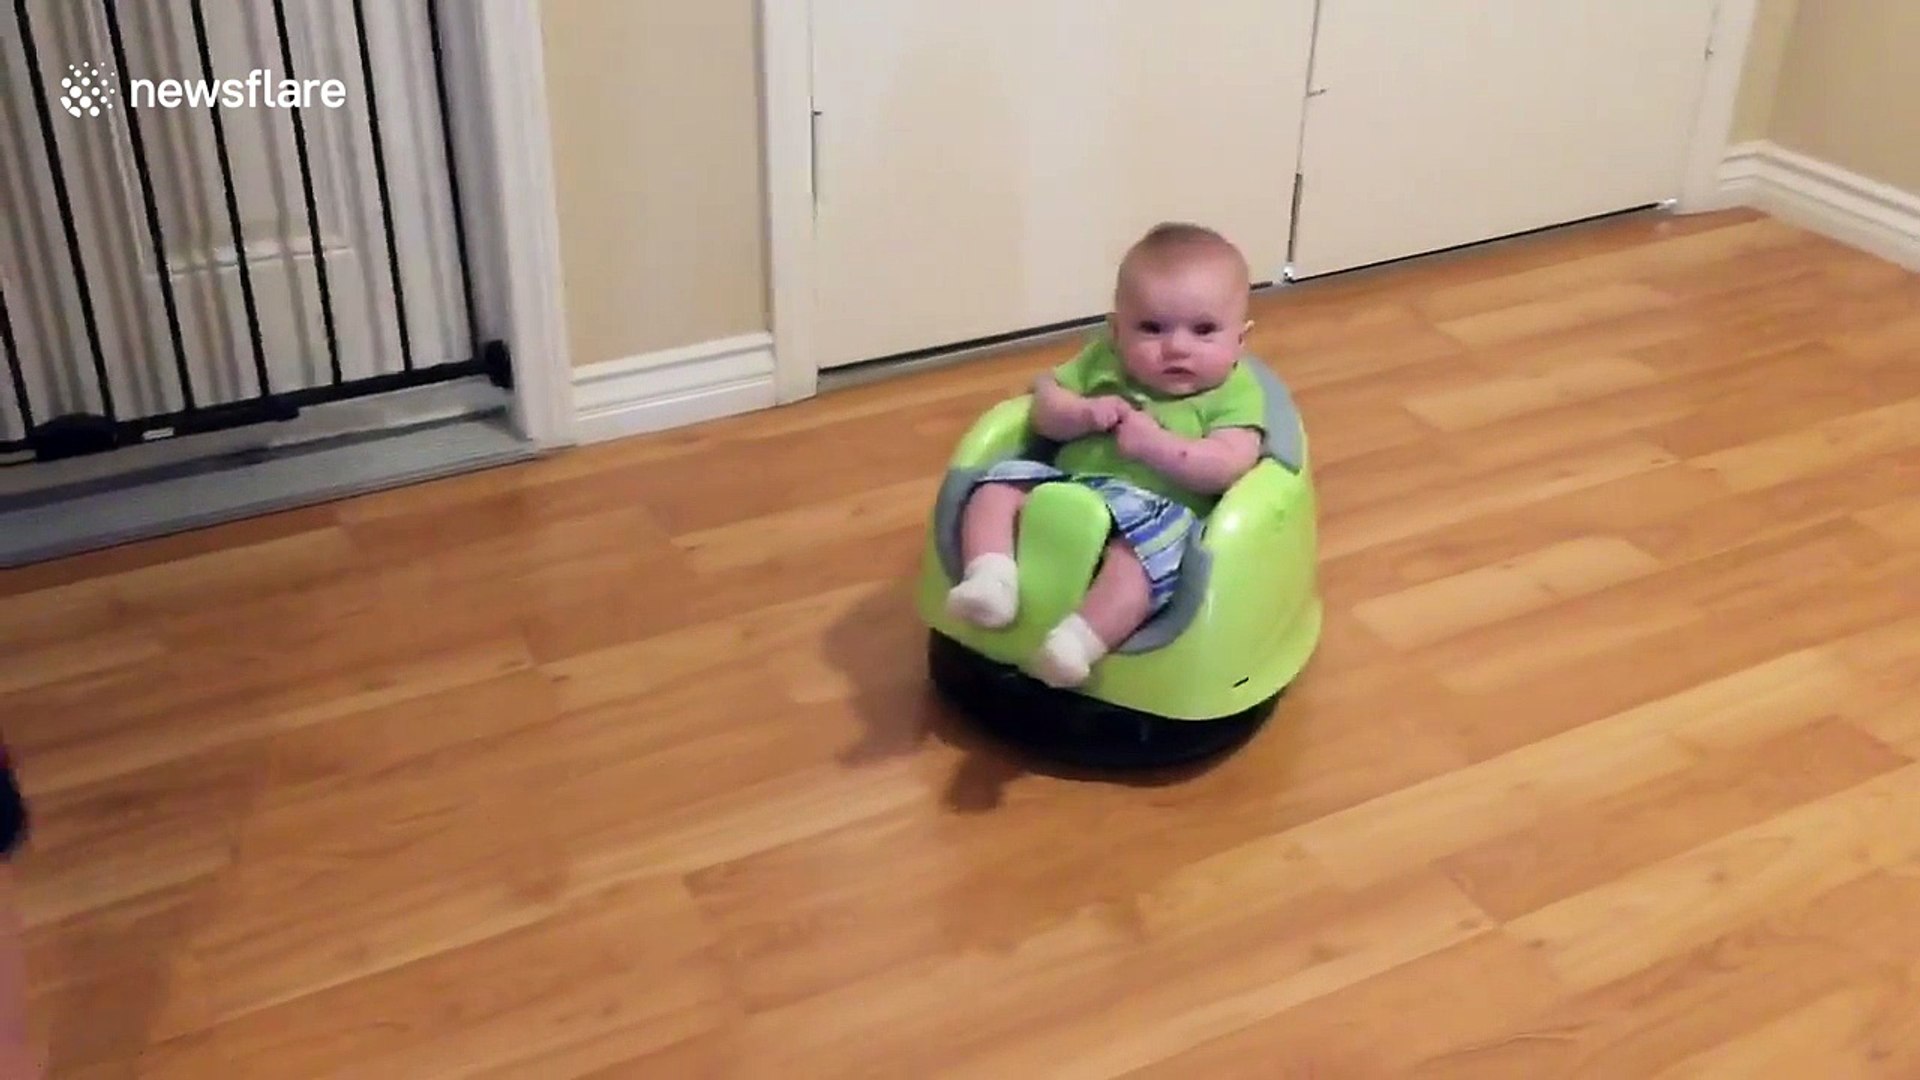 Cute baby rides a robot vacuum cleaner - video Dailymotion